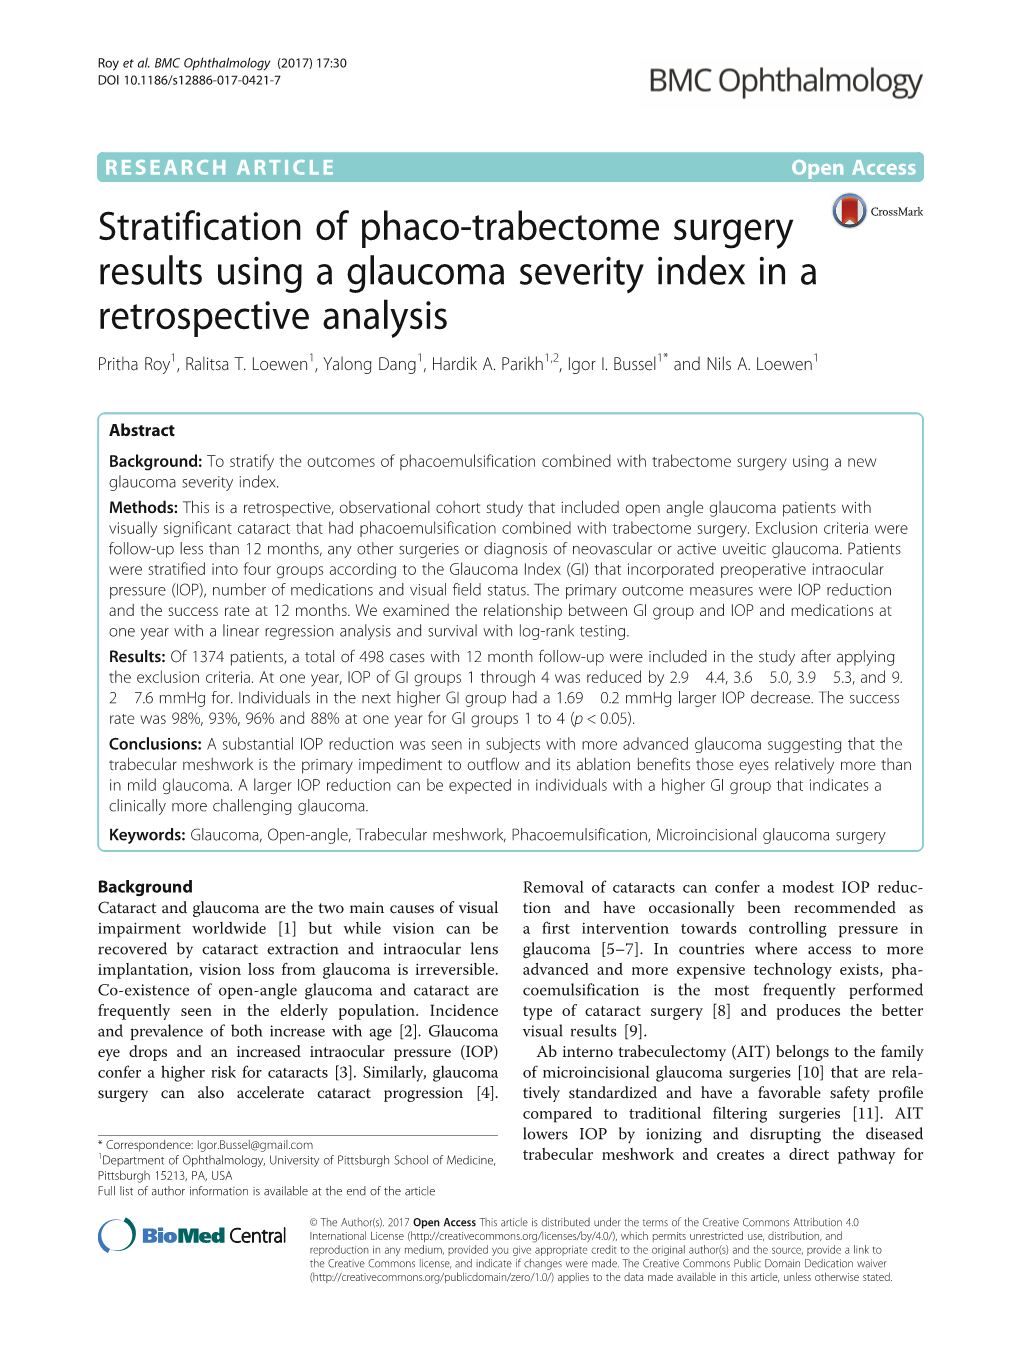 Stratification of Phaco-Trabectome Surgery Results Using a Glaucoma Severity Index in a Retrospective Analysis Pritha Roy1, Ralitsa T